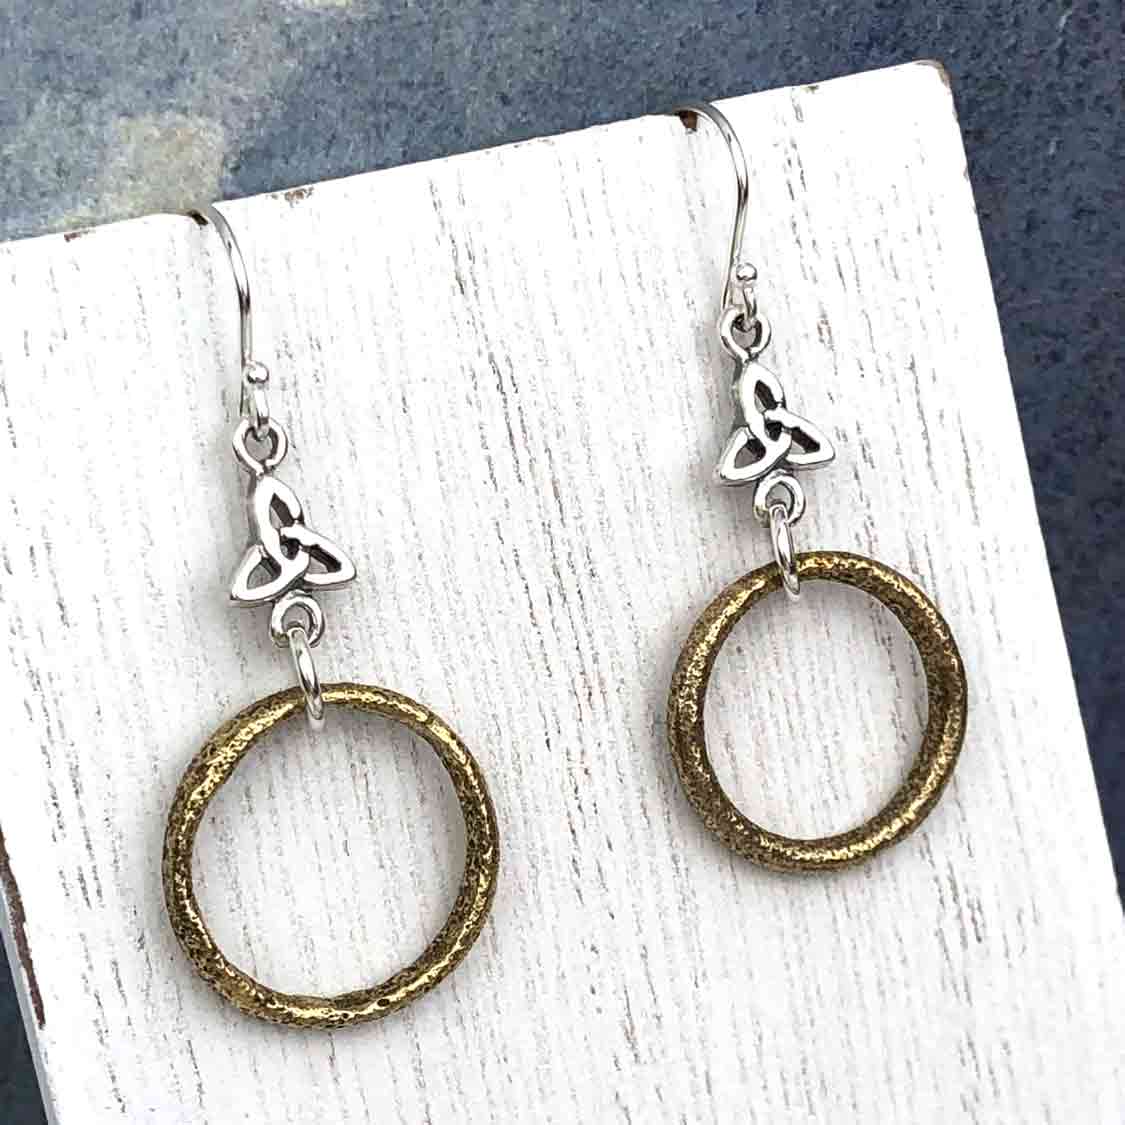 Warm Golden Bronze Celtic Ring Money Earrings with Trinity Knot Charm